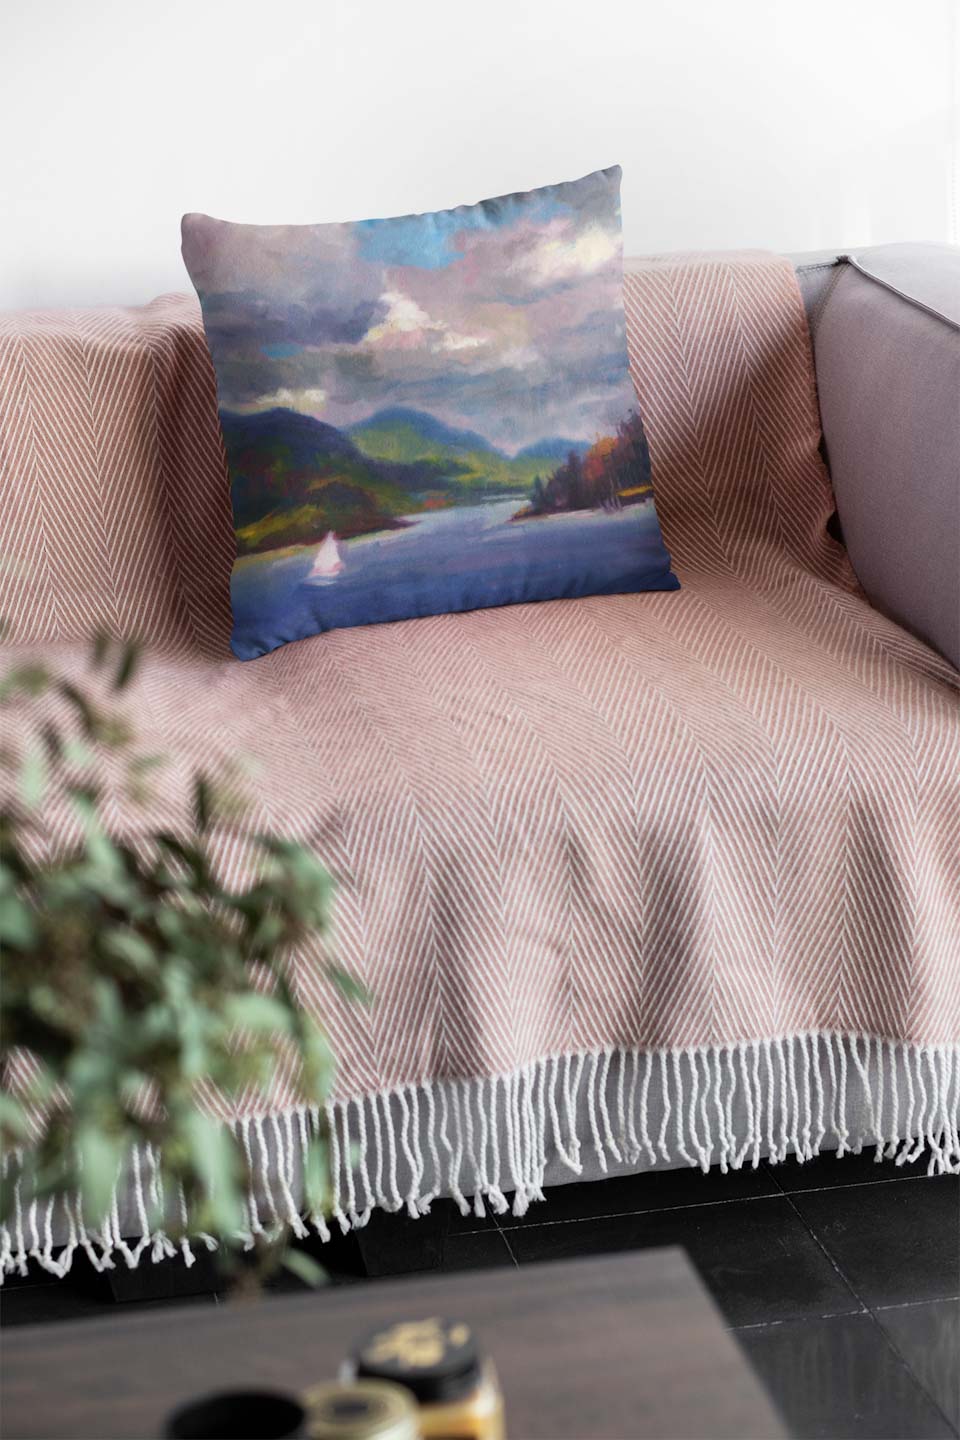 Custom throw pillow featuring original seascape painting of sailboat by Talya Johnson